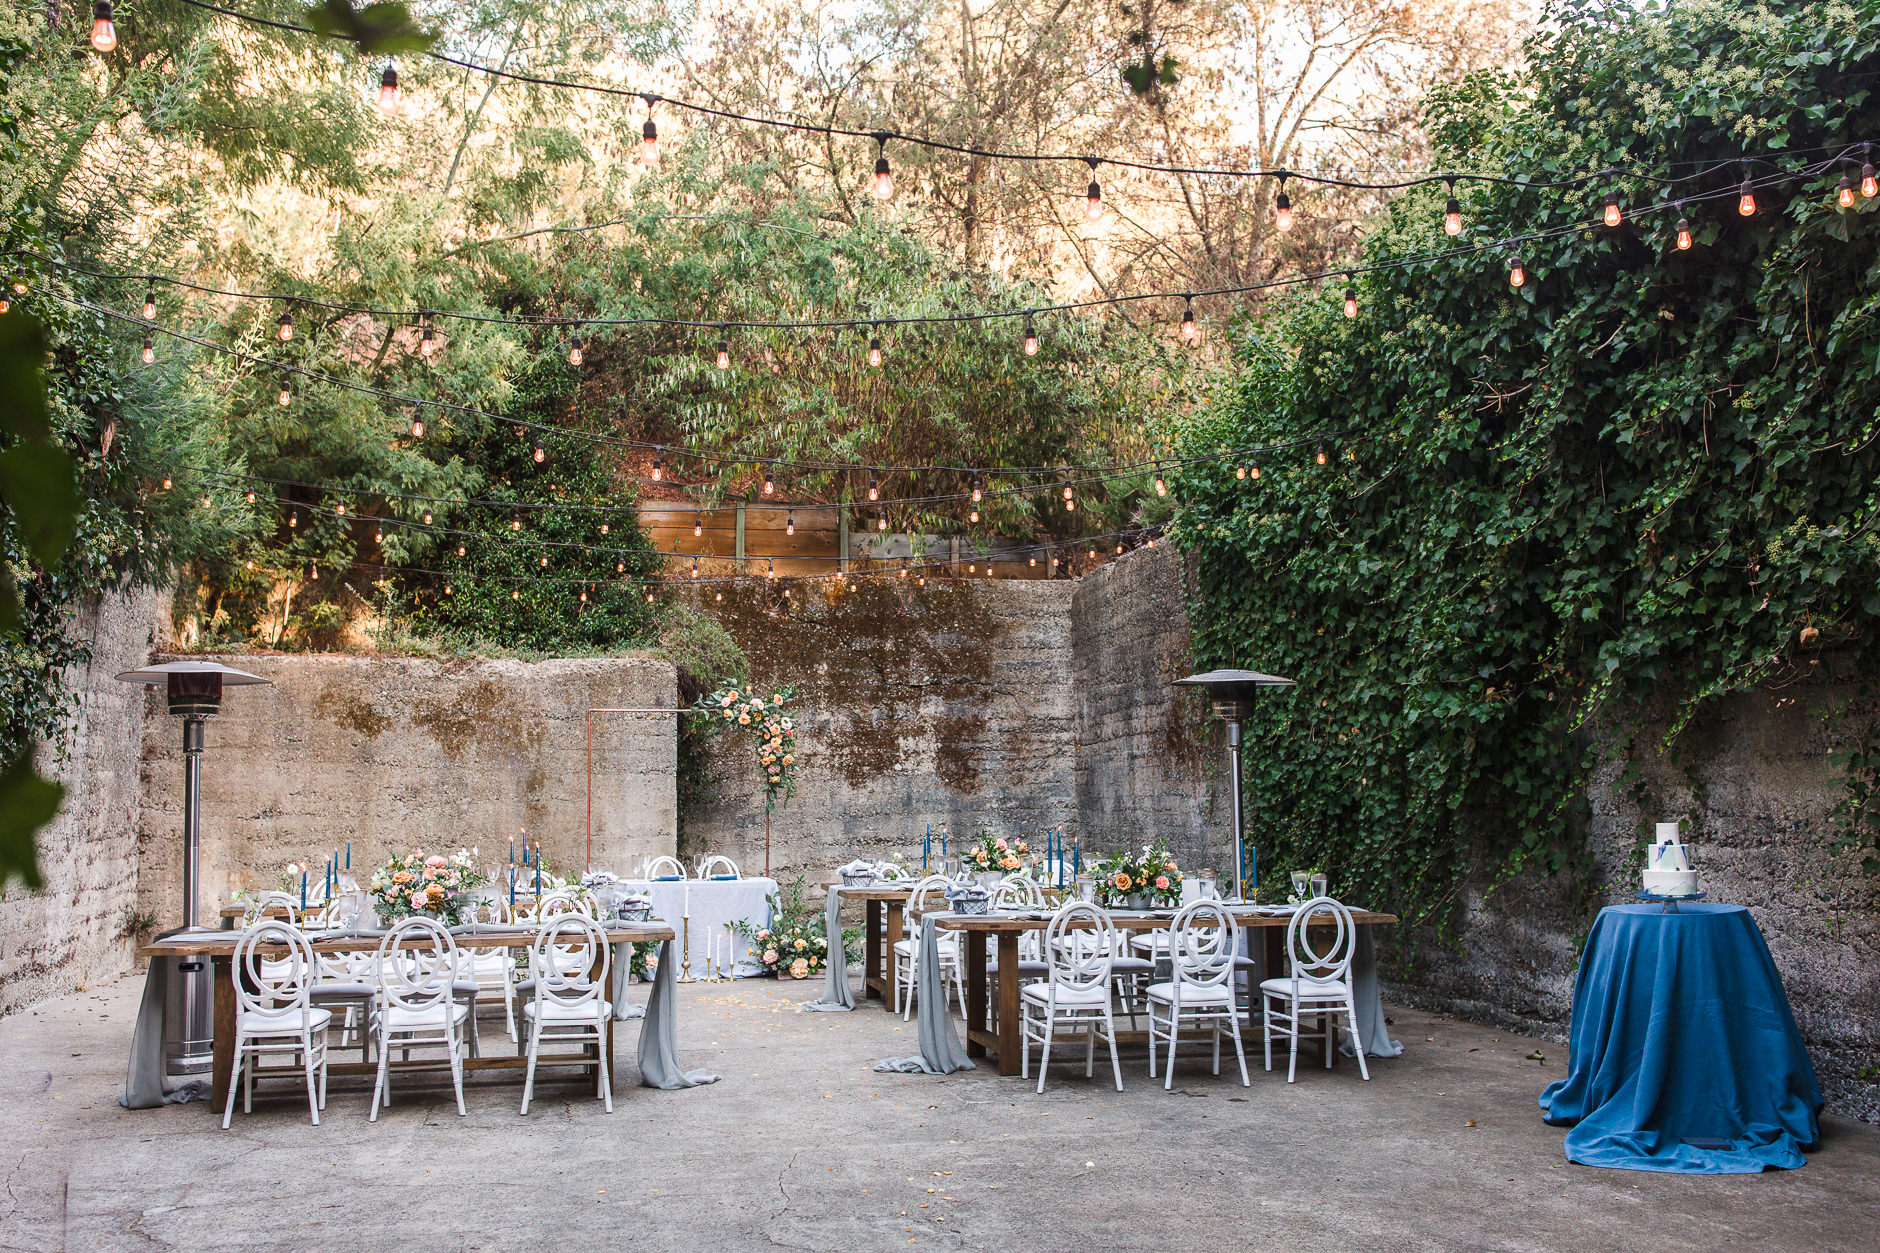 Wedding reception set up in Barrel Room at Sand Rock Farm with ivy covered walls and string lights